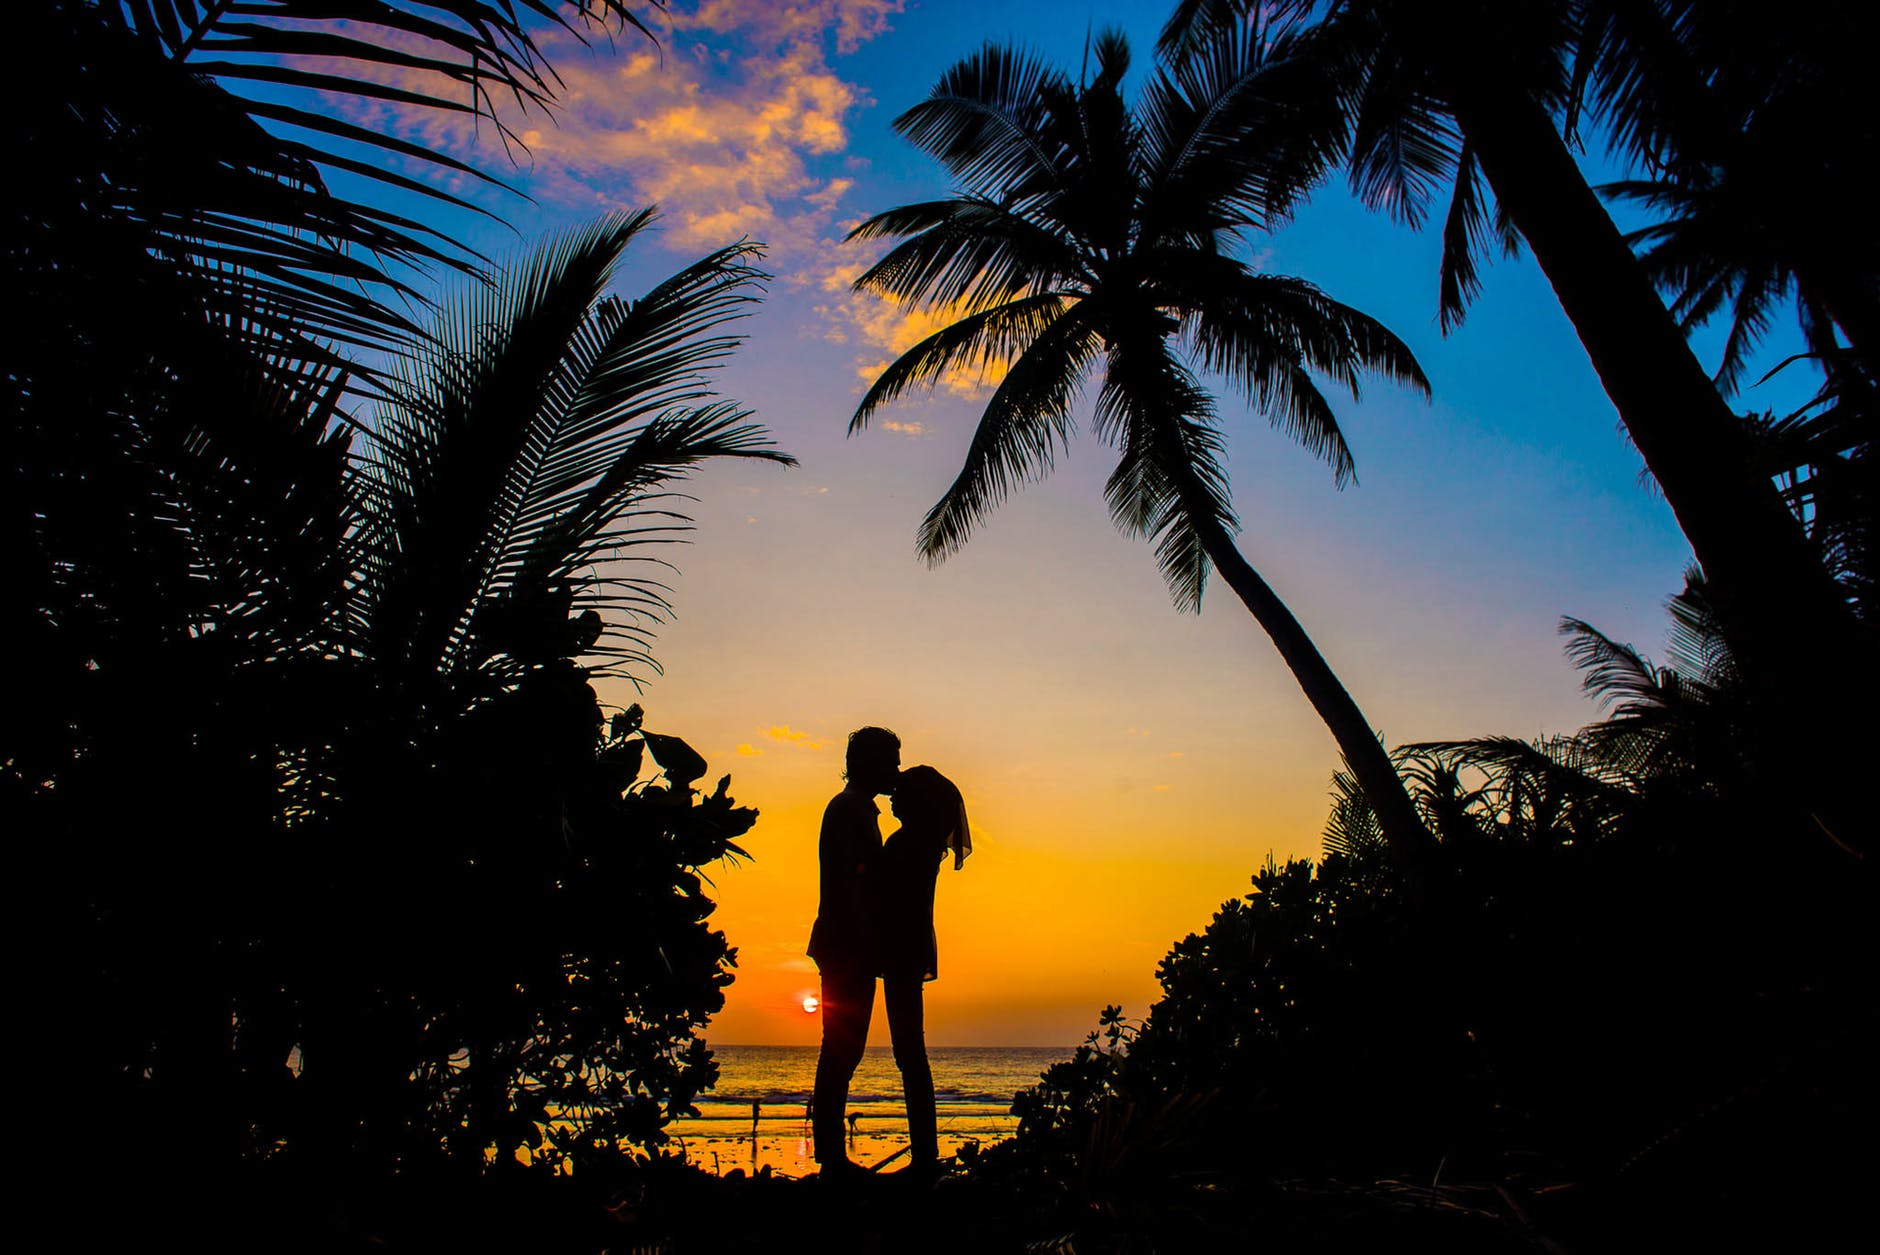 It is sunset on a beach. The orange sky is reflected in the water. There are palm trees silhouetted against the sky, and a man and woman also silhouetted as the man kisses the woman on the forehead.